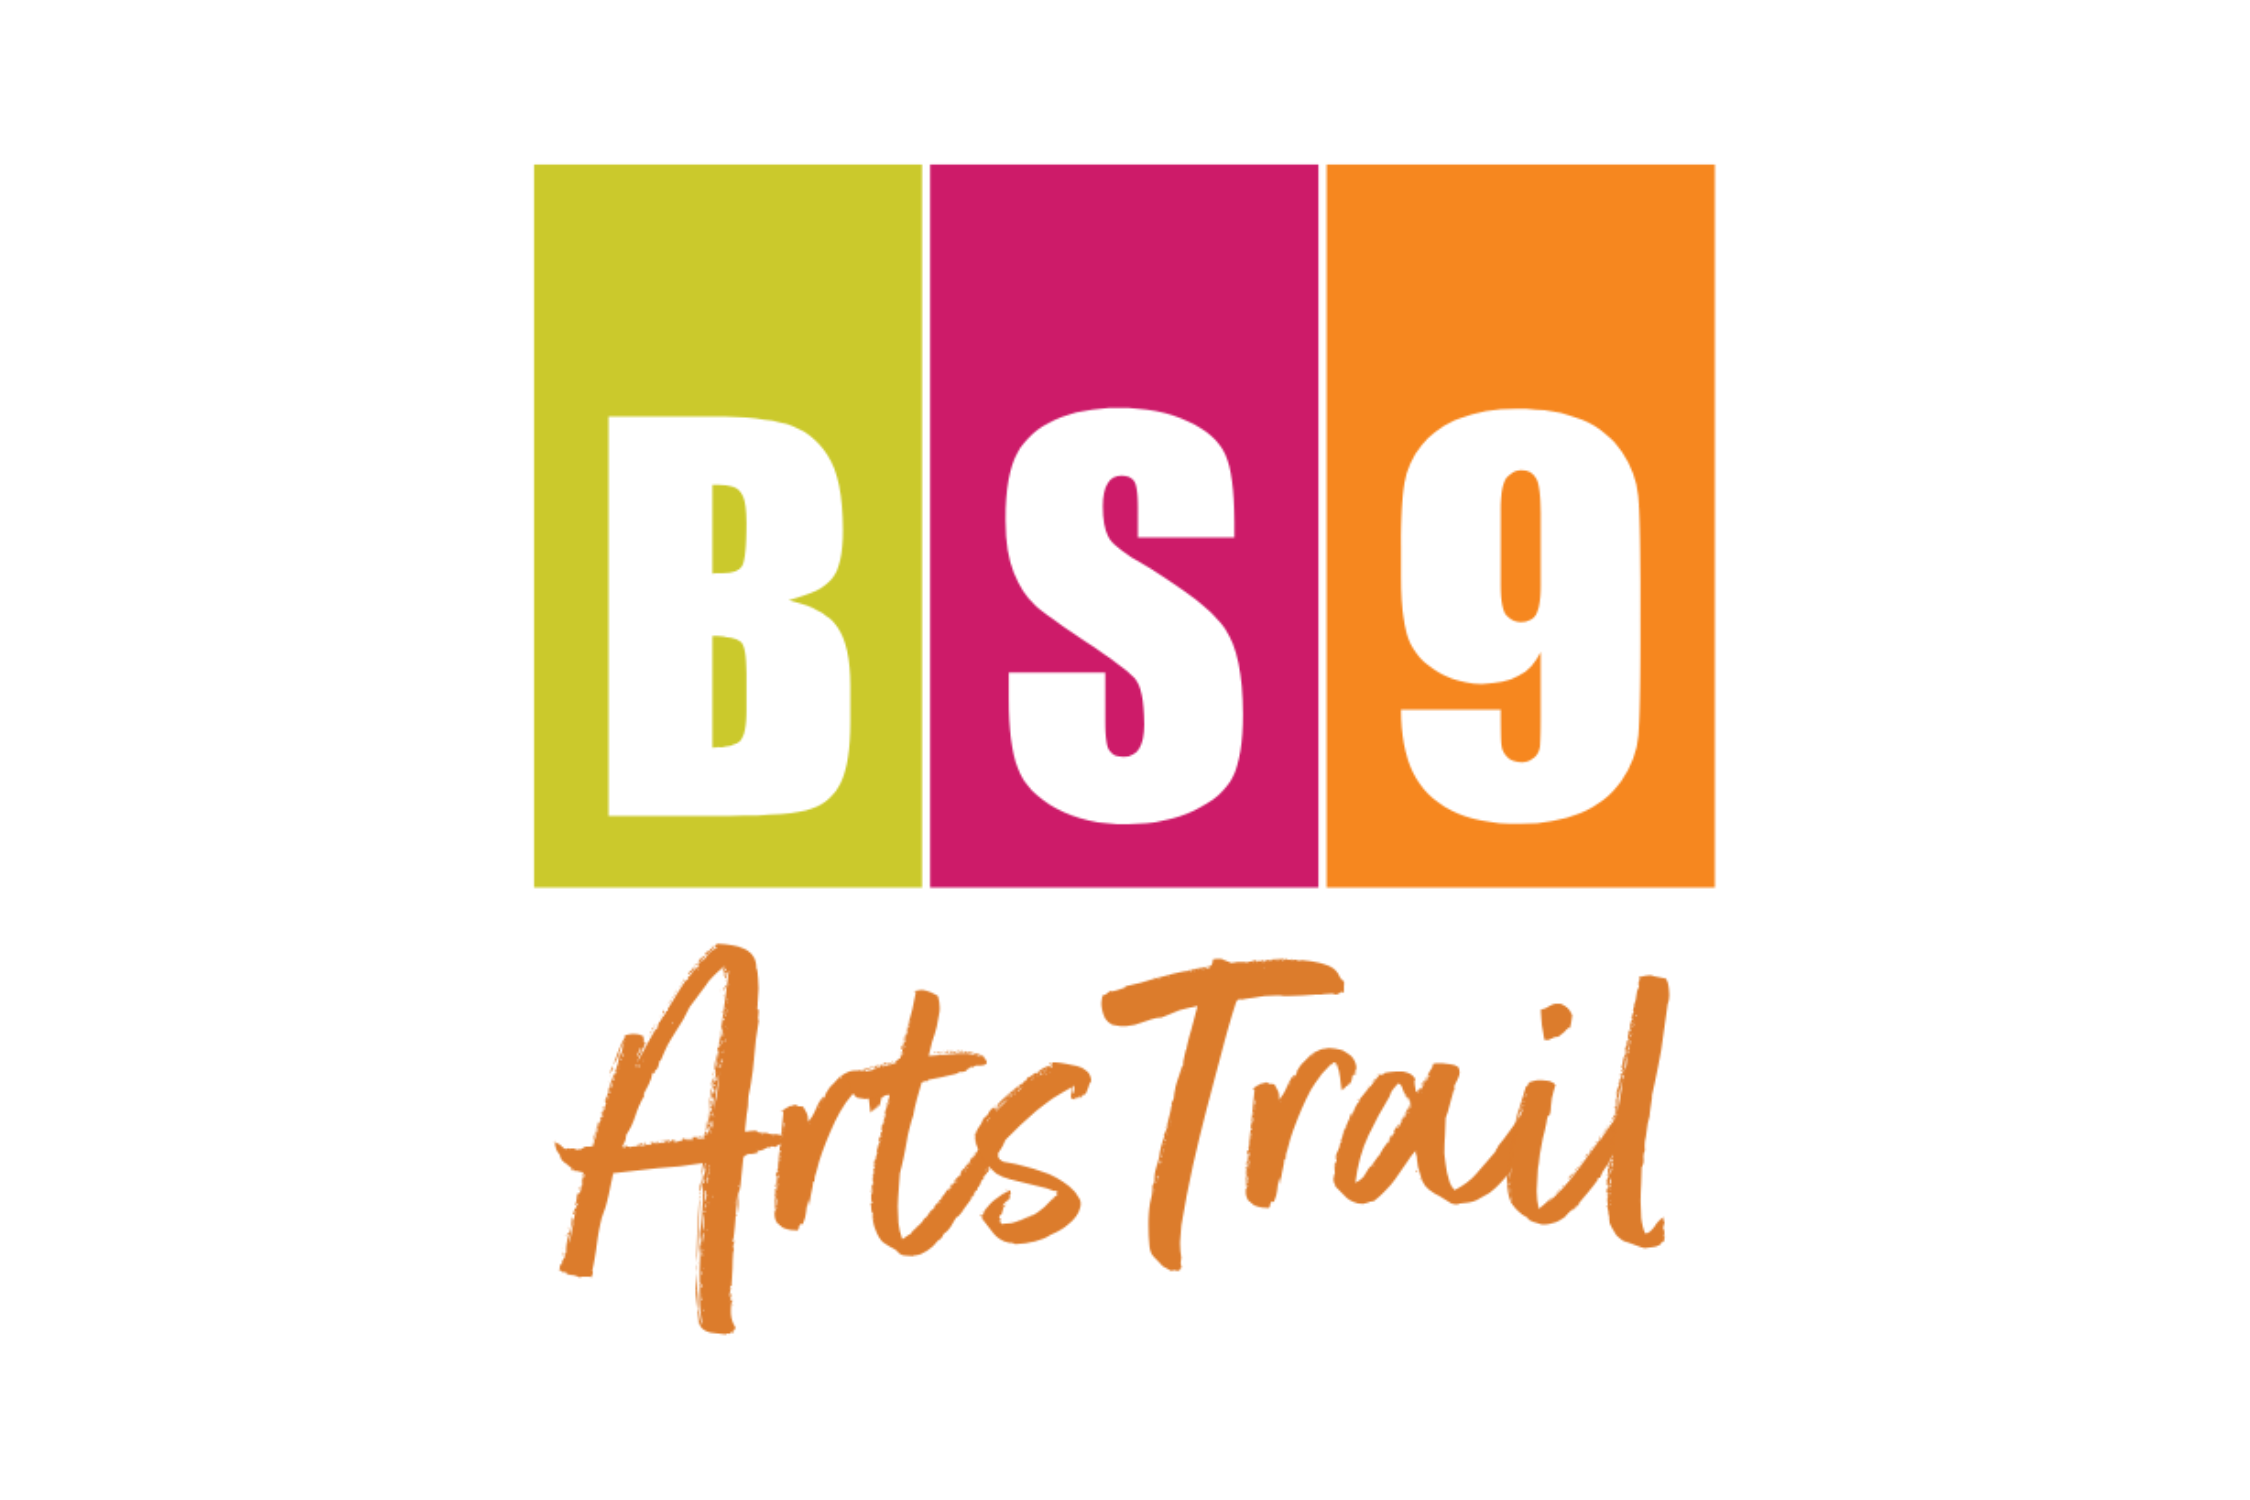 Supporting local initiatives: VWV proudly continues sponsorship of BS9 Arts Trail for third consecutive year